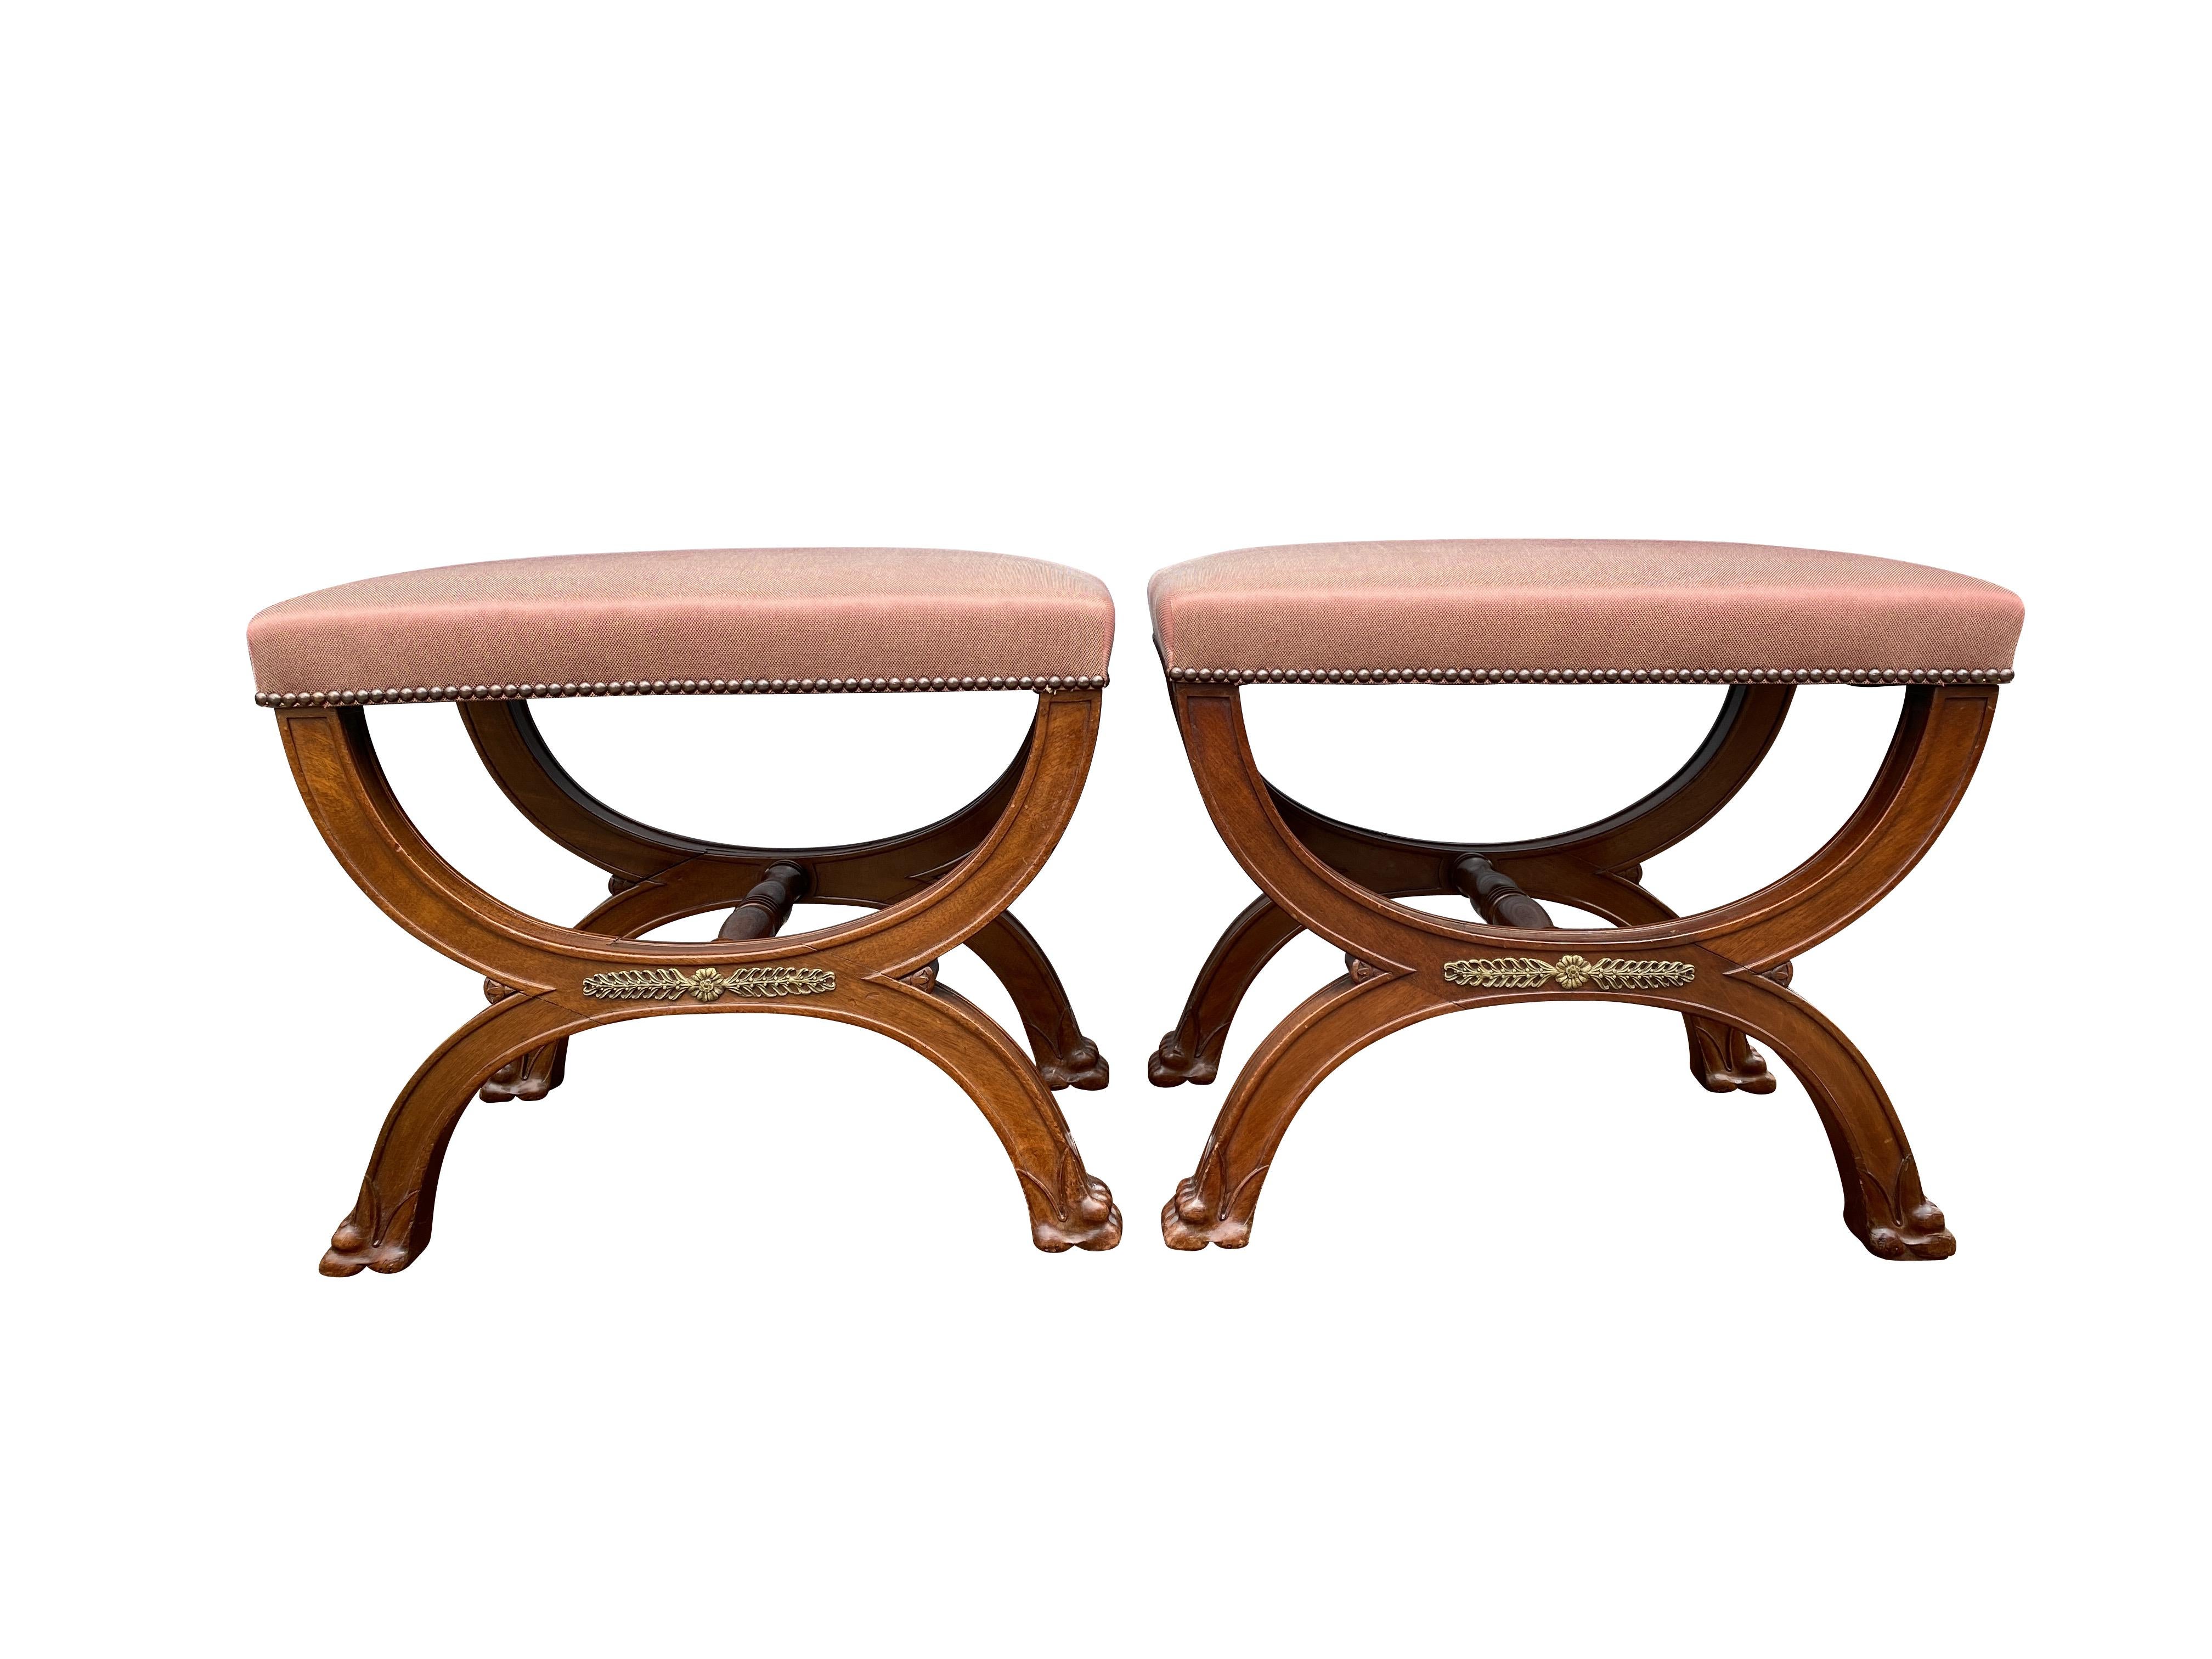 Rectangular upholstered seats with klismos form bases with turned stretchers, bronze mounts and paw feet.